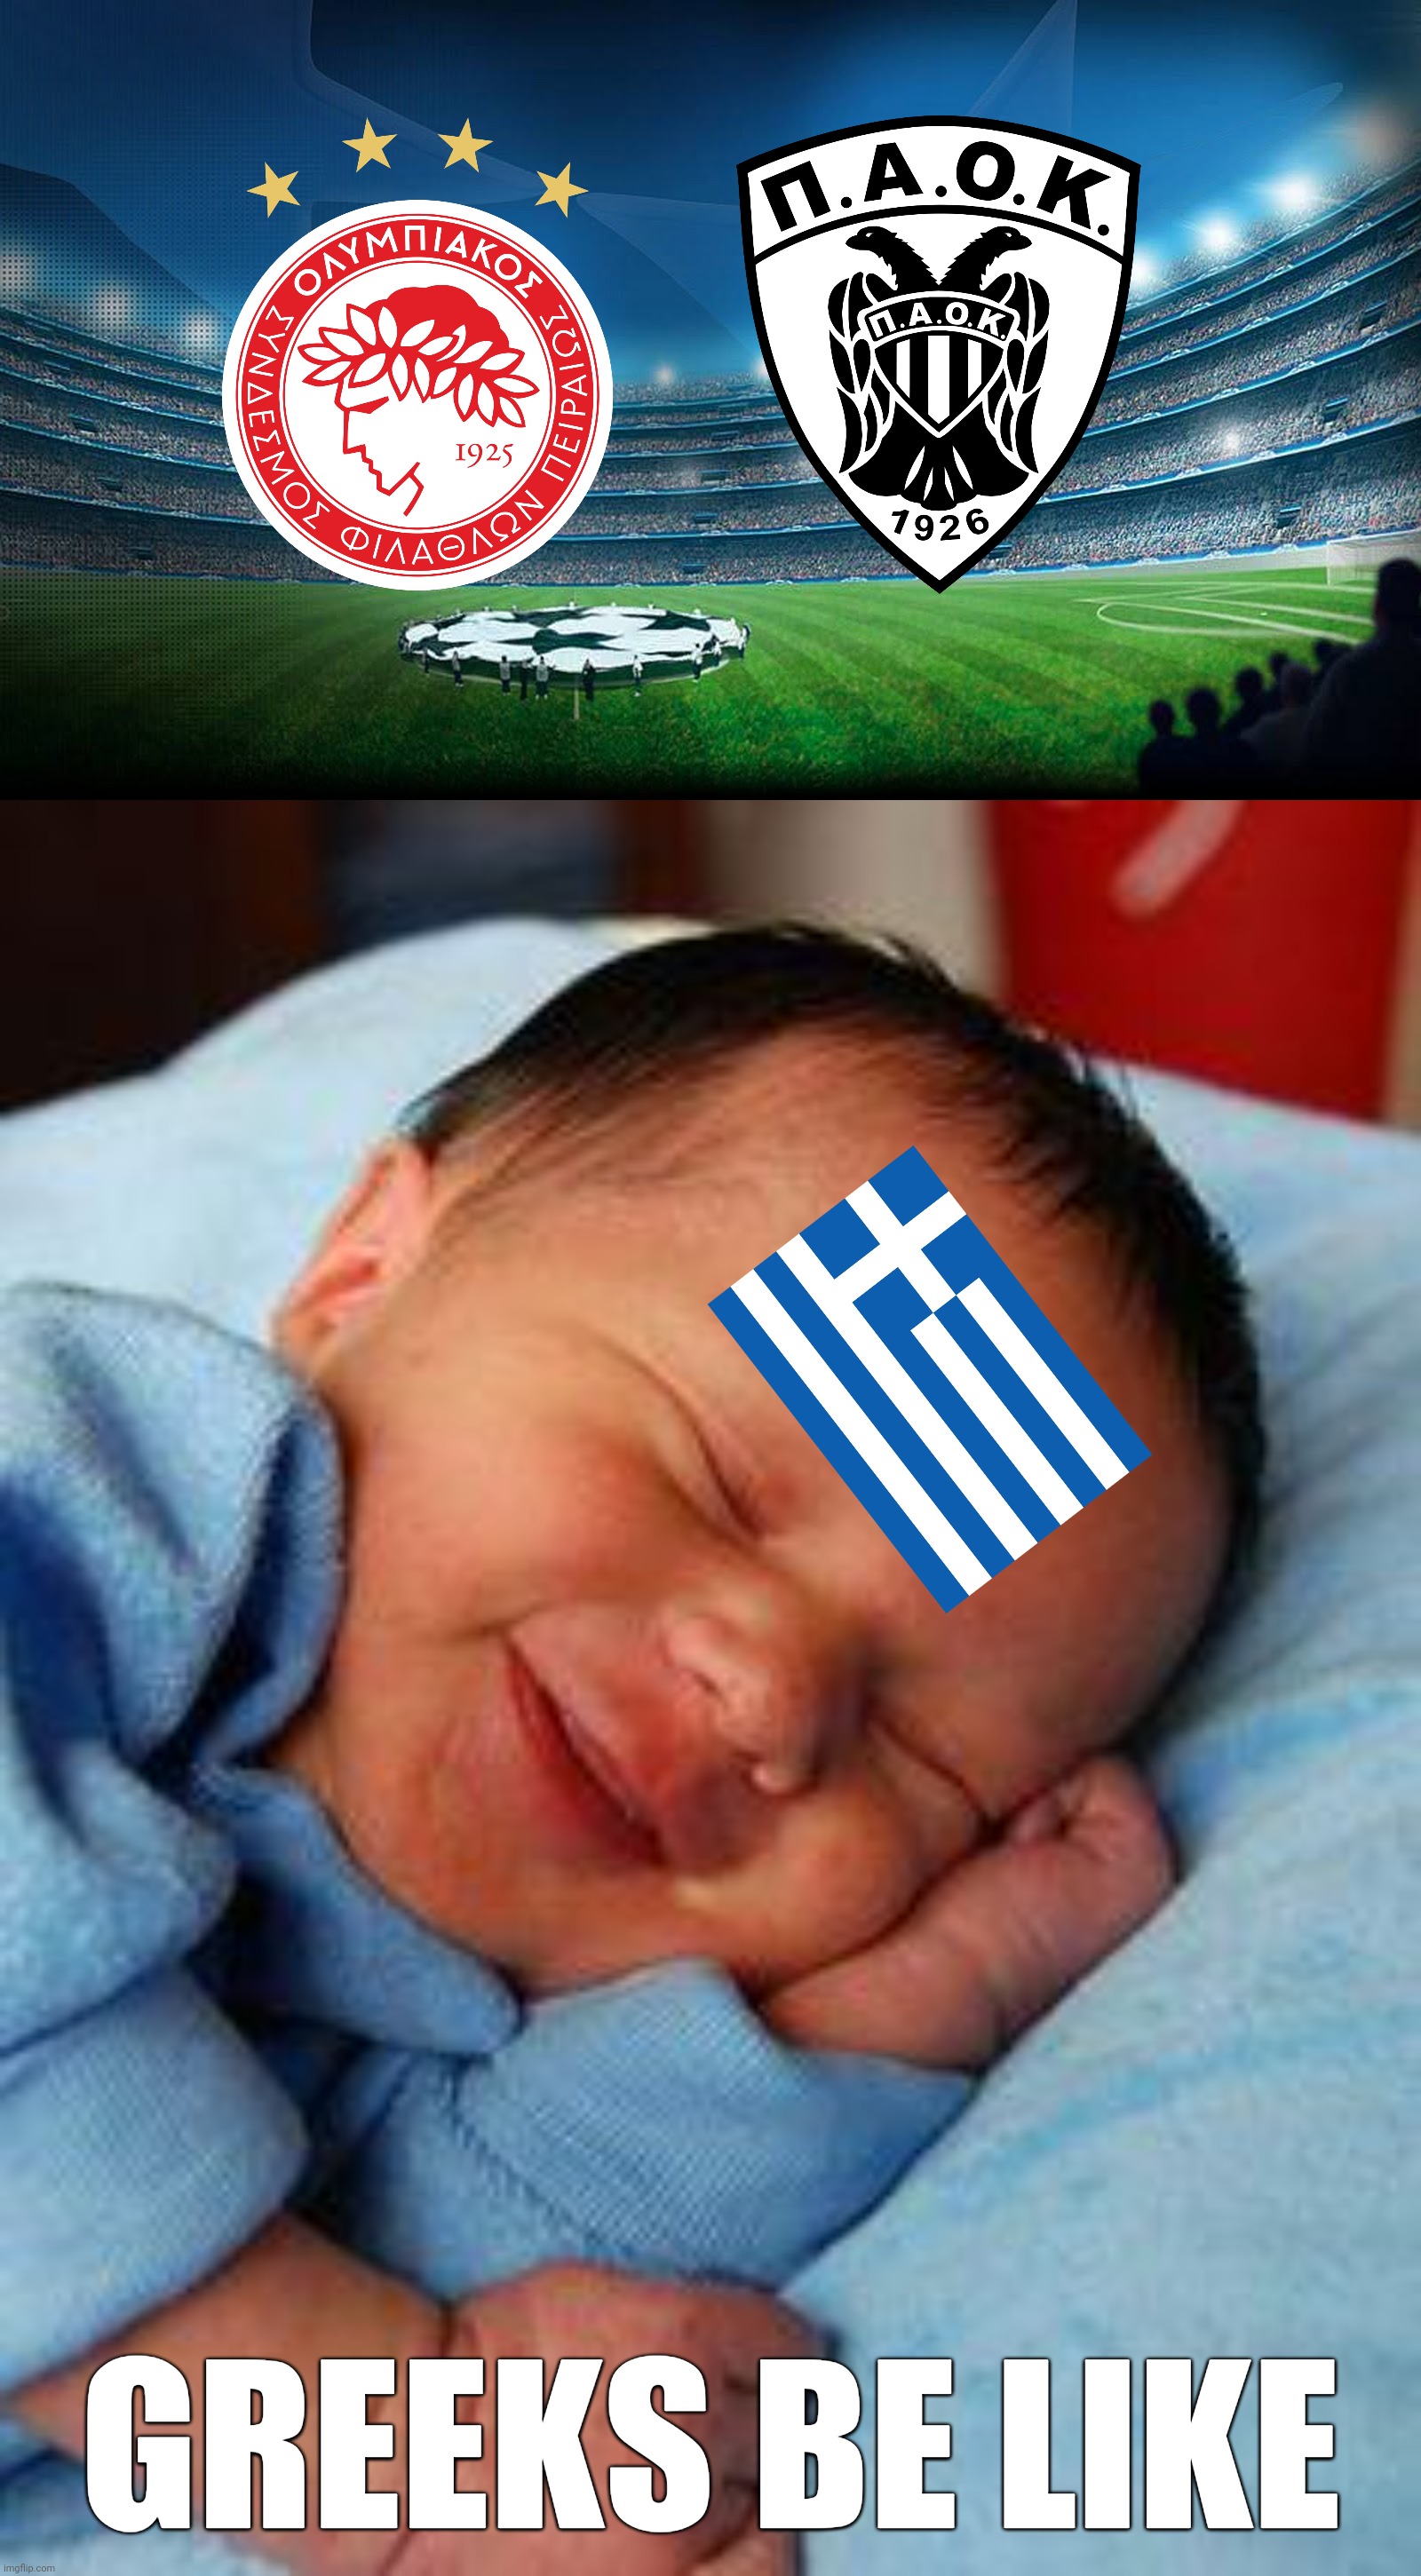 that's how greeks dreaming | GREEKS BE LIKE | image tagged in champions league,greece,olympiacos,paok,memes,futbol | made w/ Imgflip meme maker